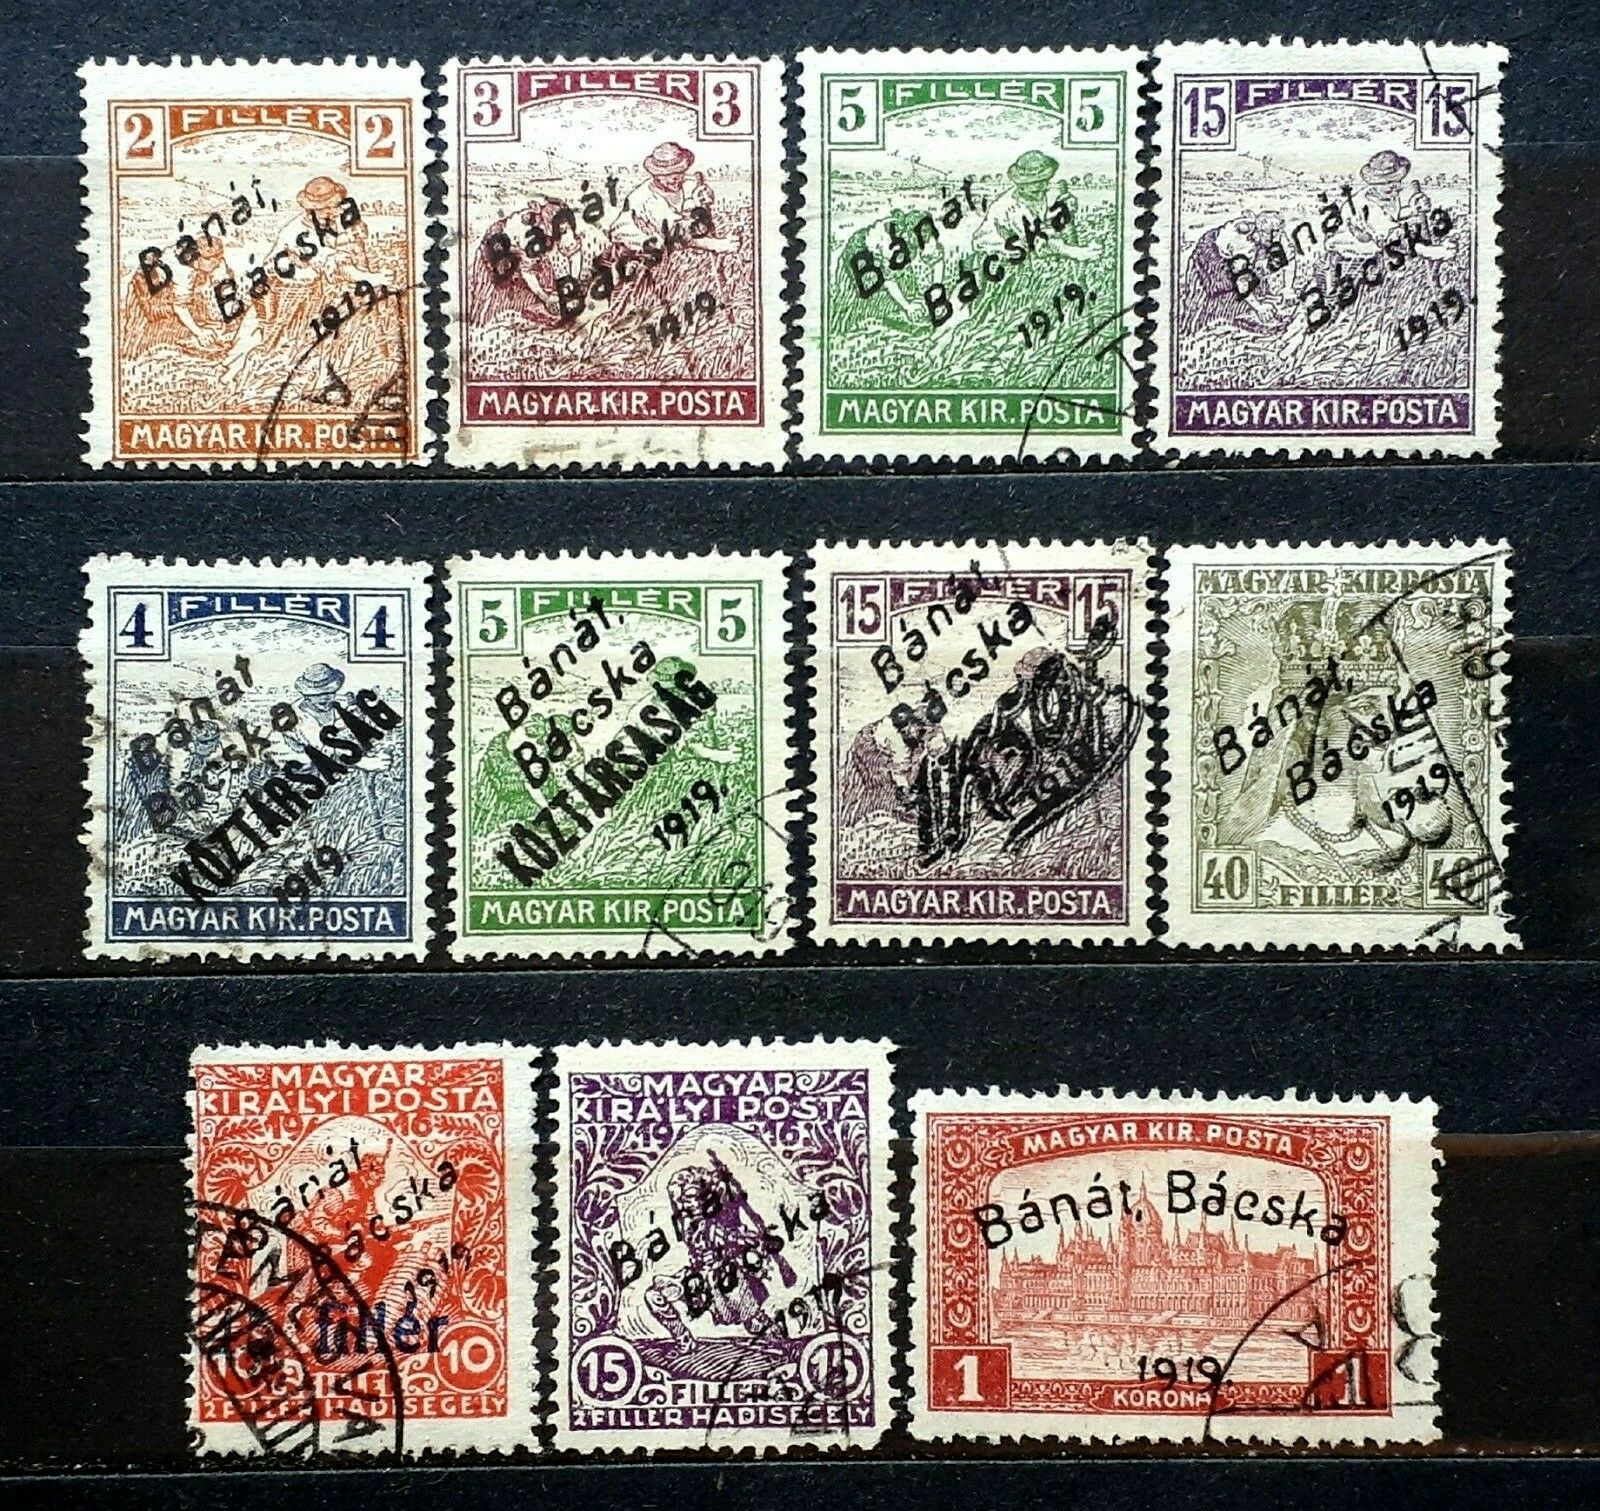 Hungary Stamps Serbien Occupation Banat Bacska Overprint 1919 - Used Collection